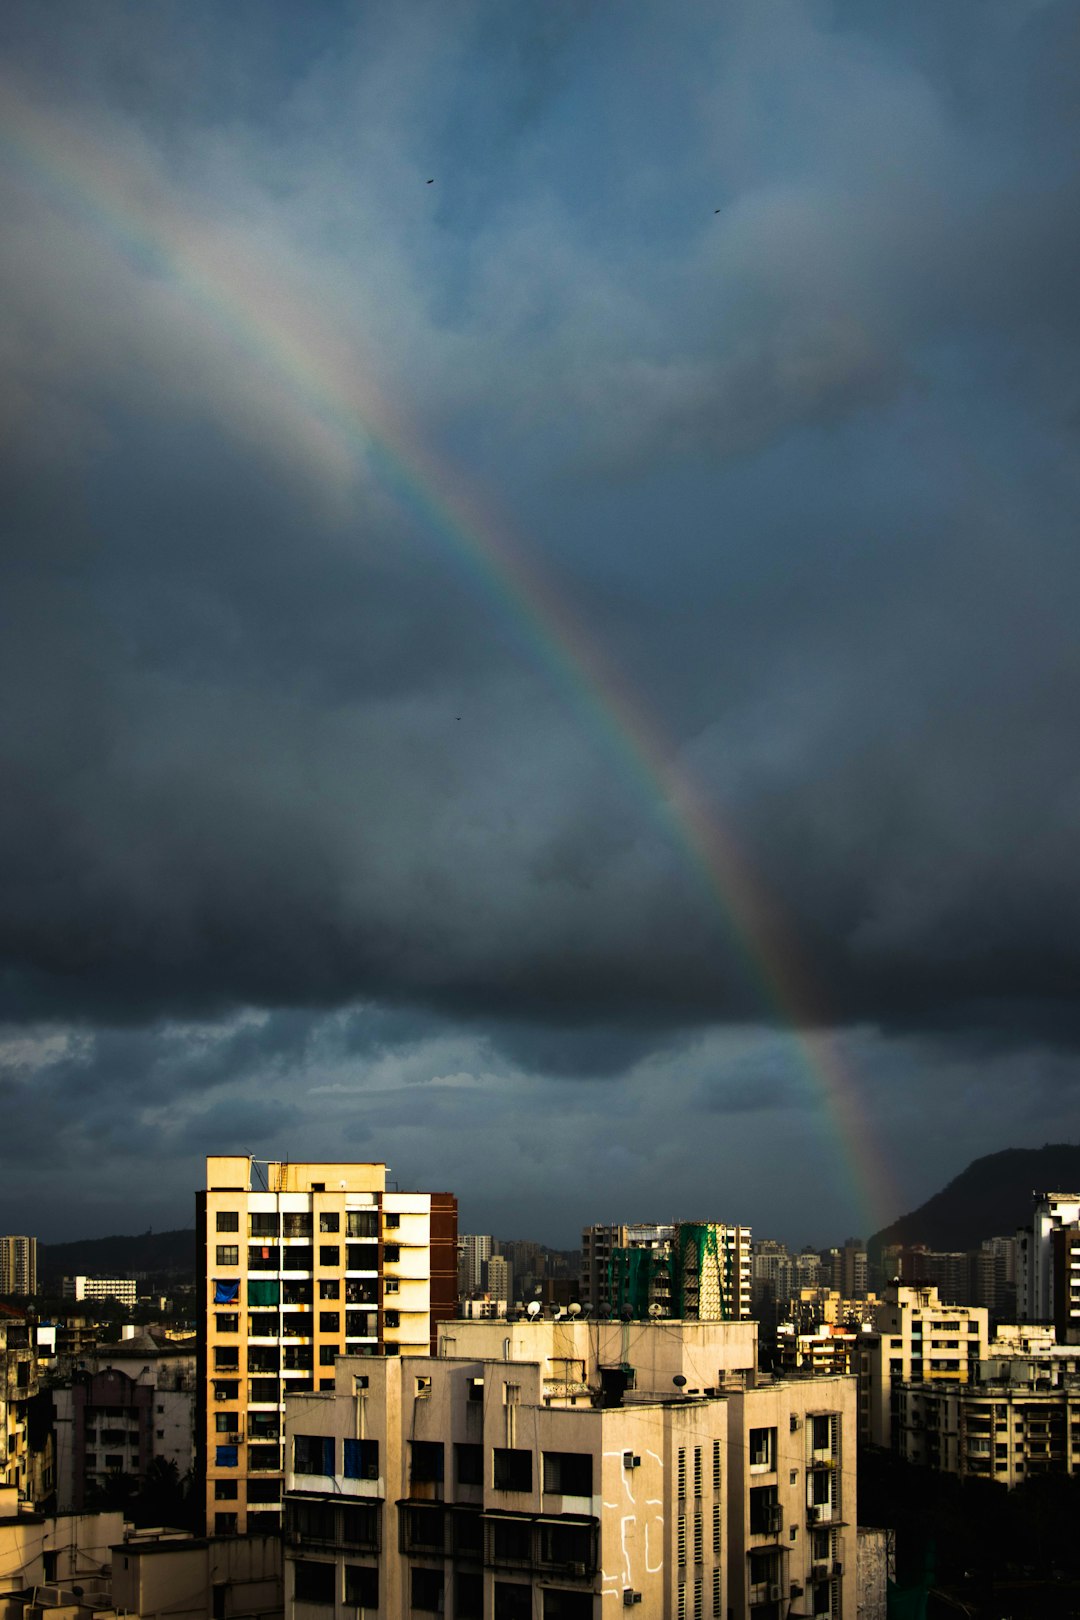 city with high rise buildings under rainbow